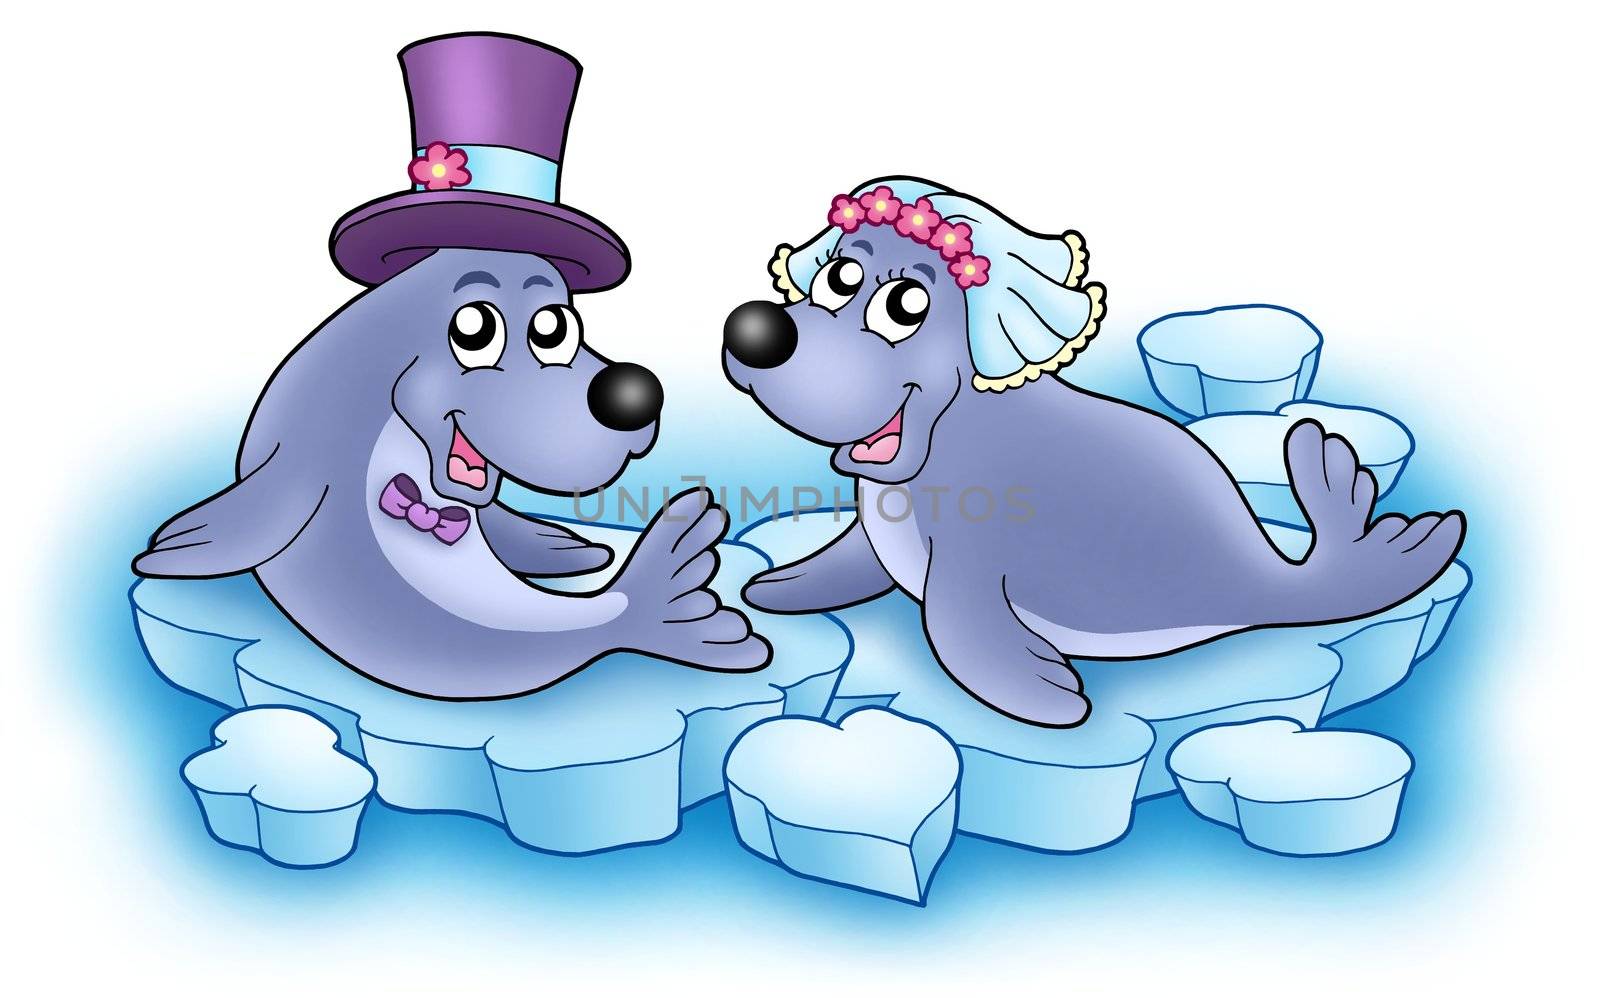 Wedding image with cute seals - color illustration.